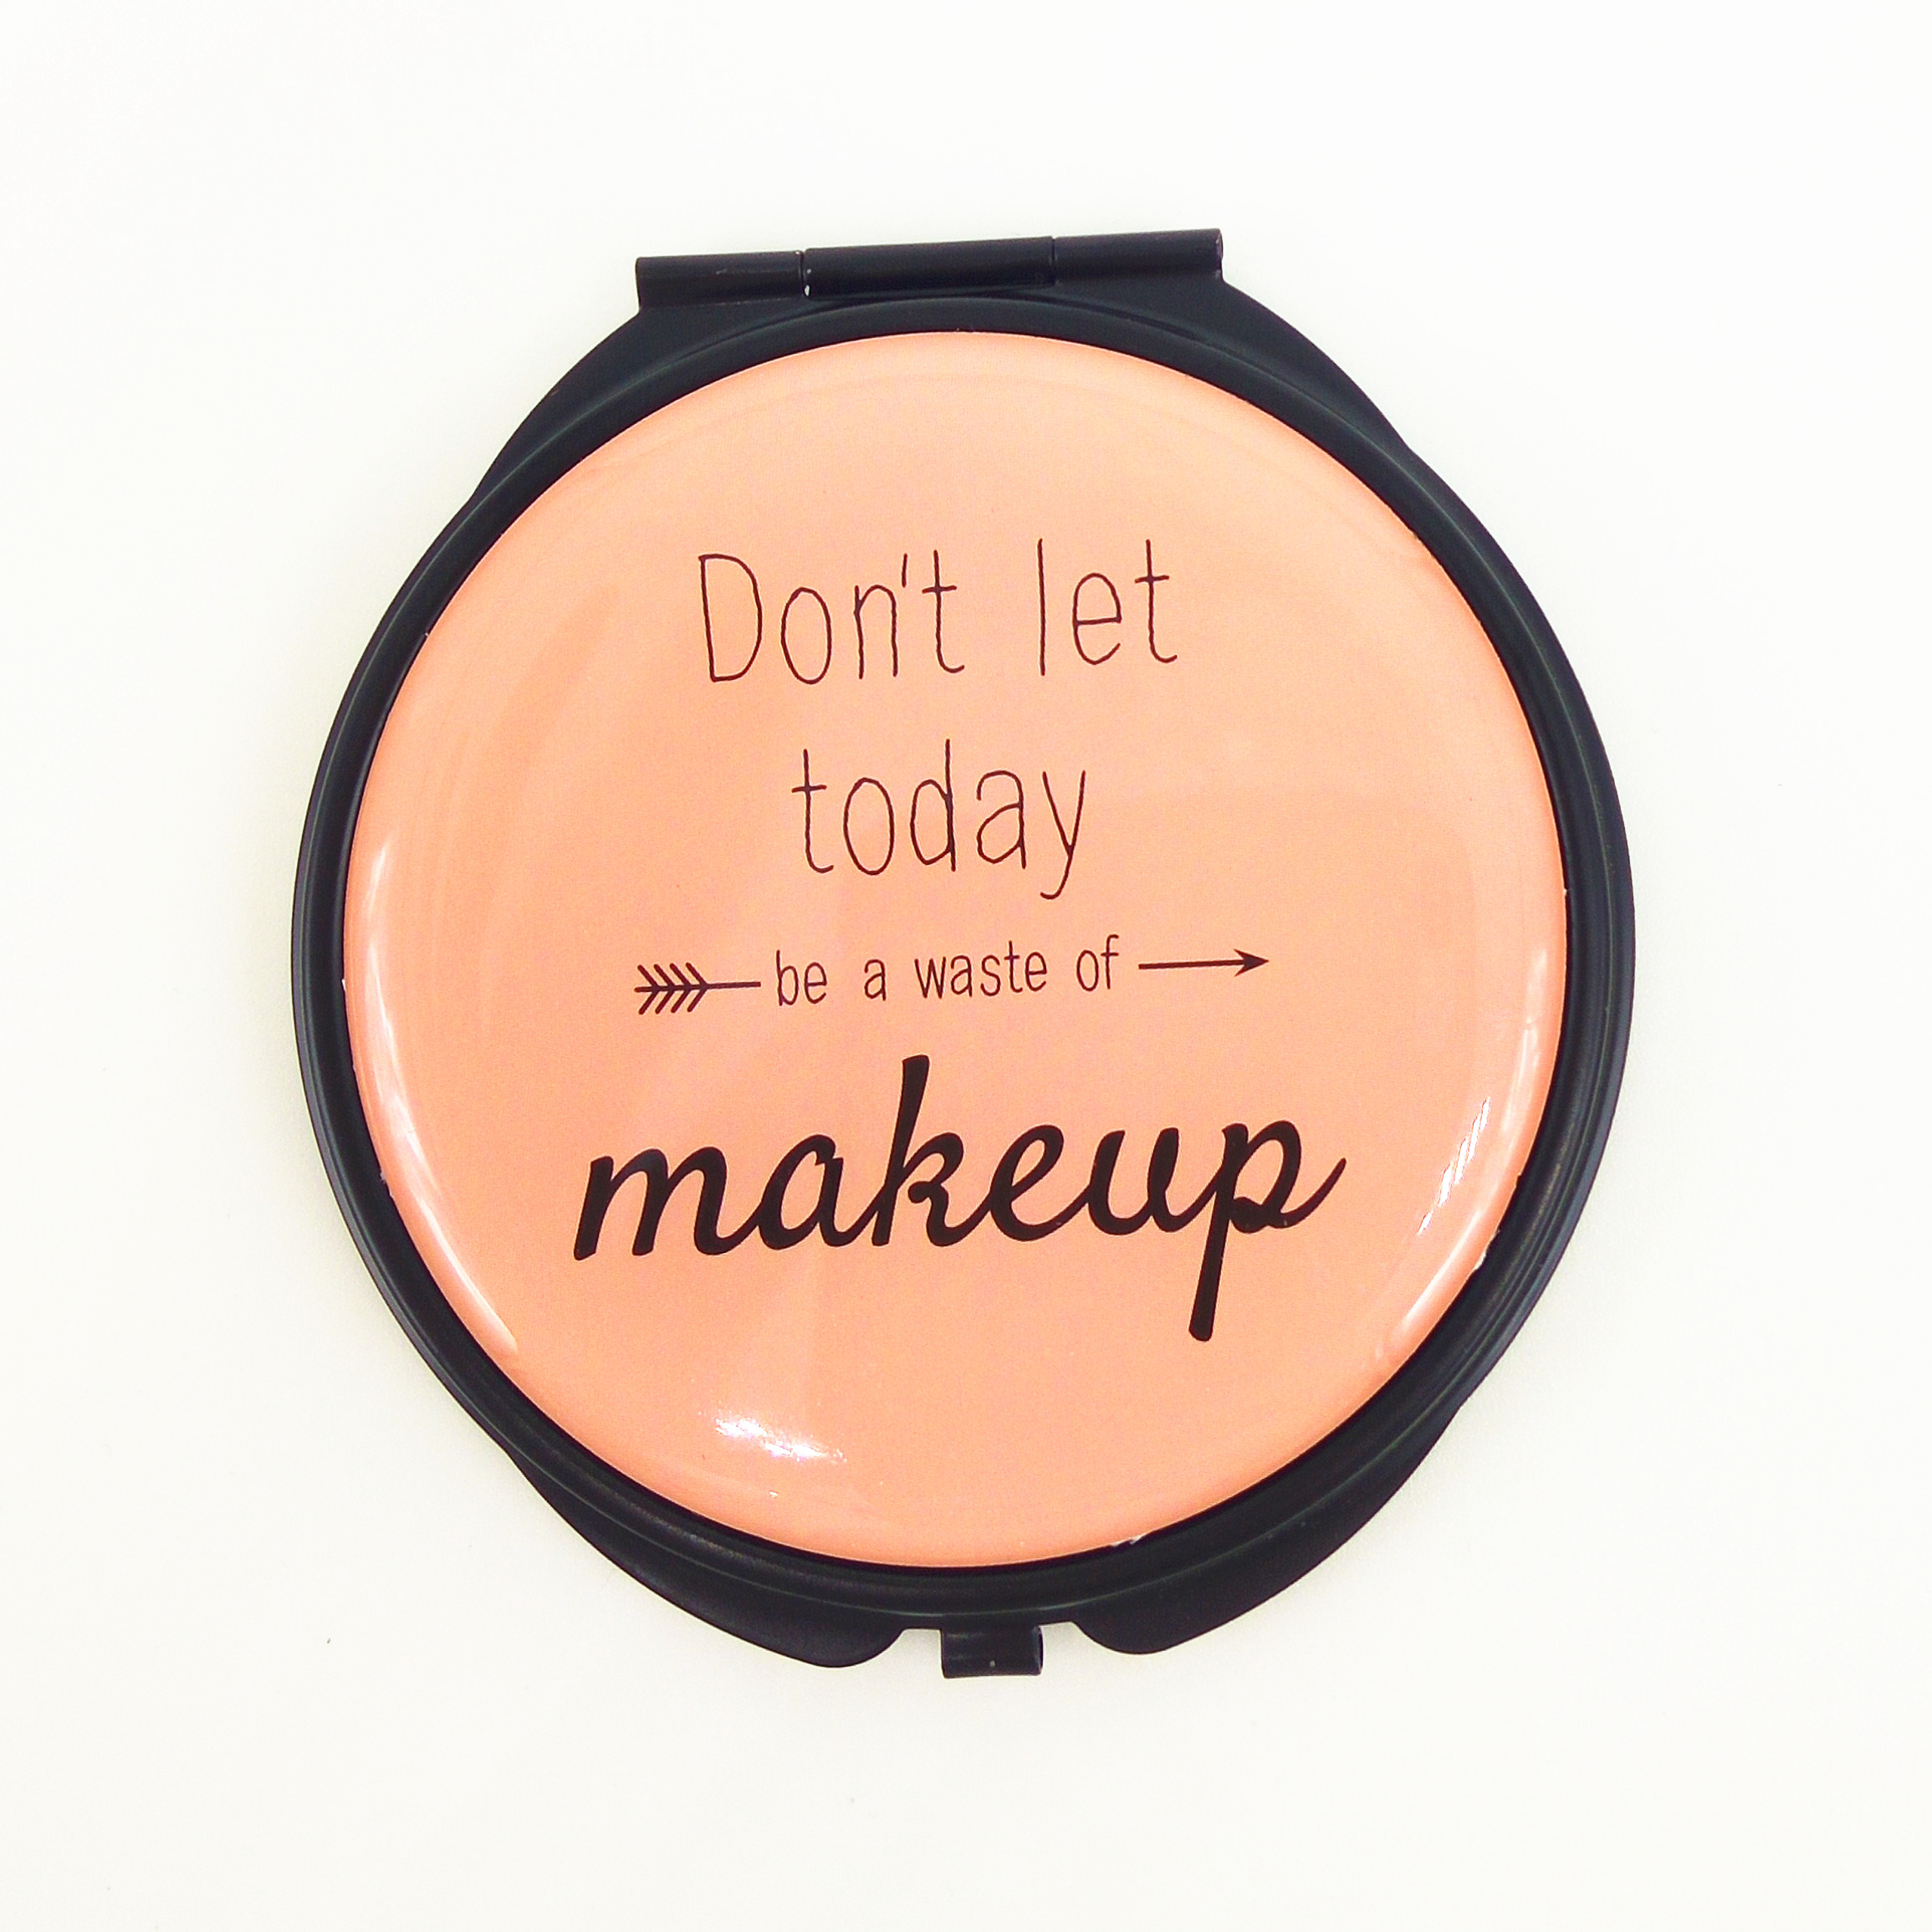 custom design compact mirror for nearsight makeup in hand luggage